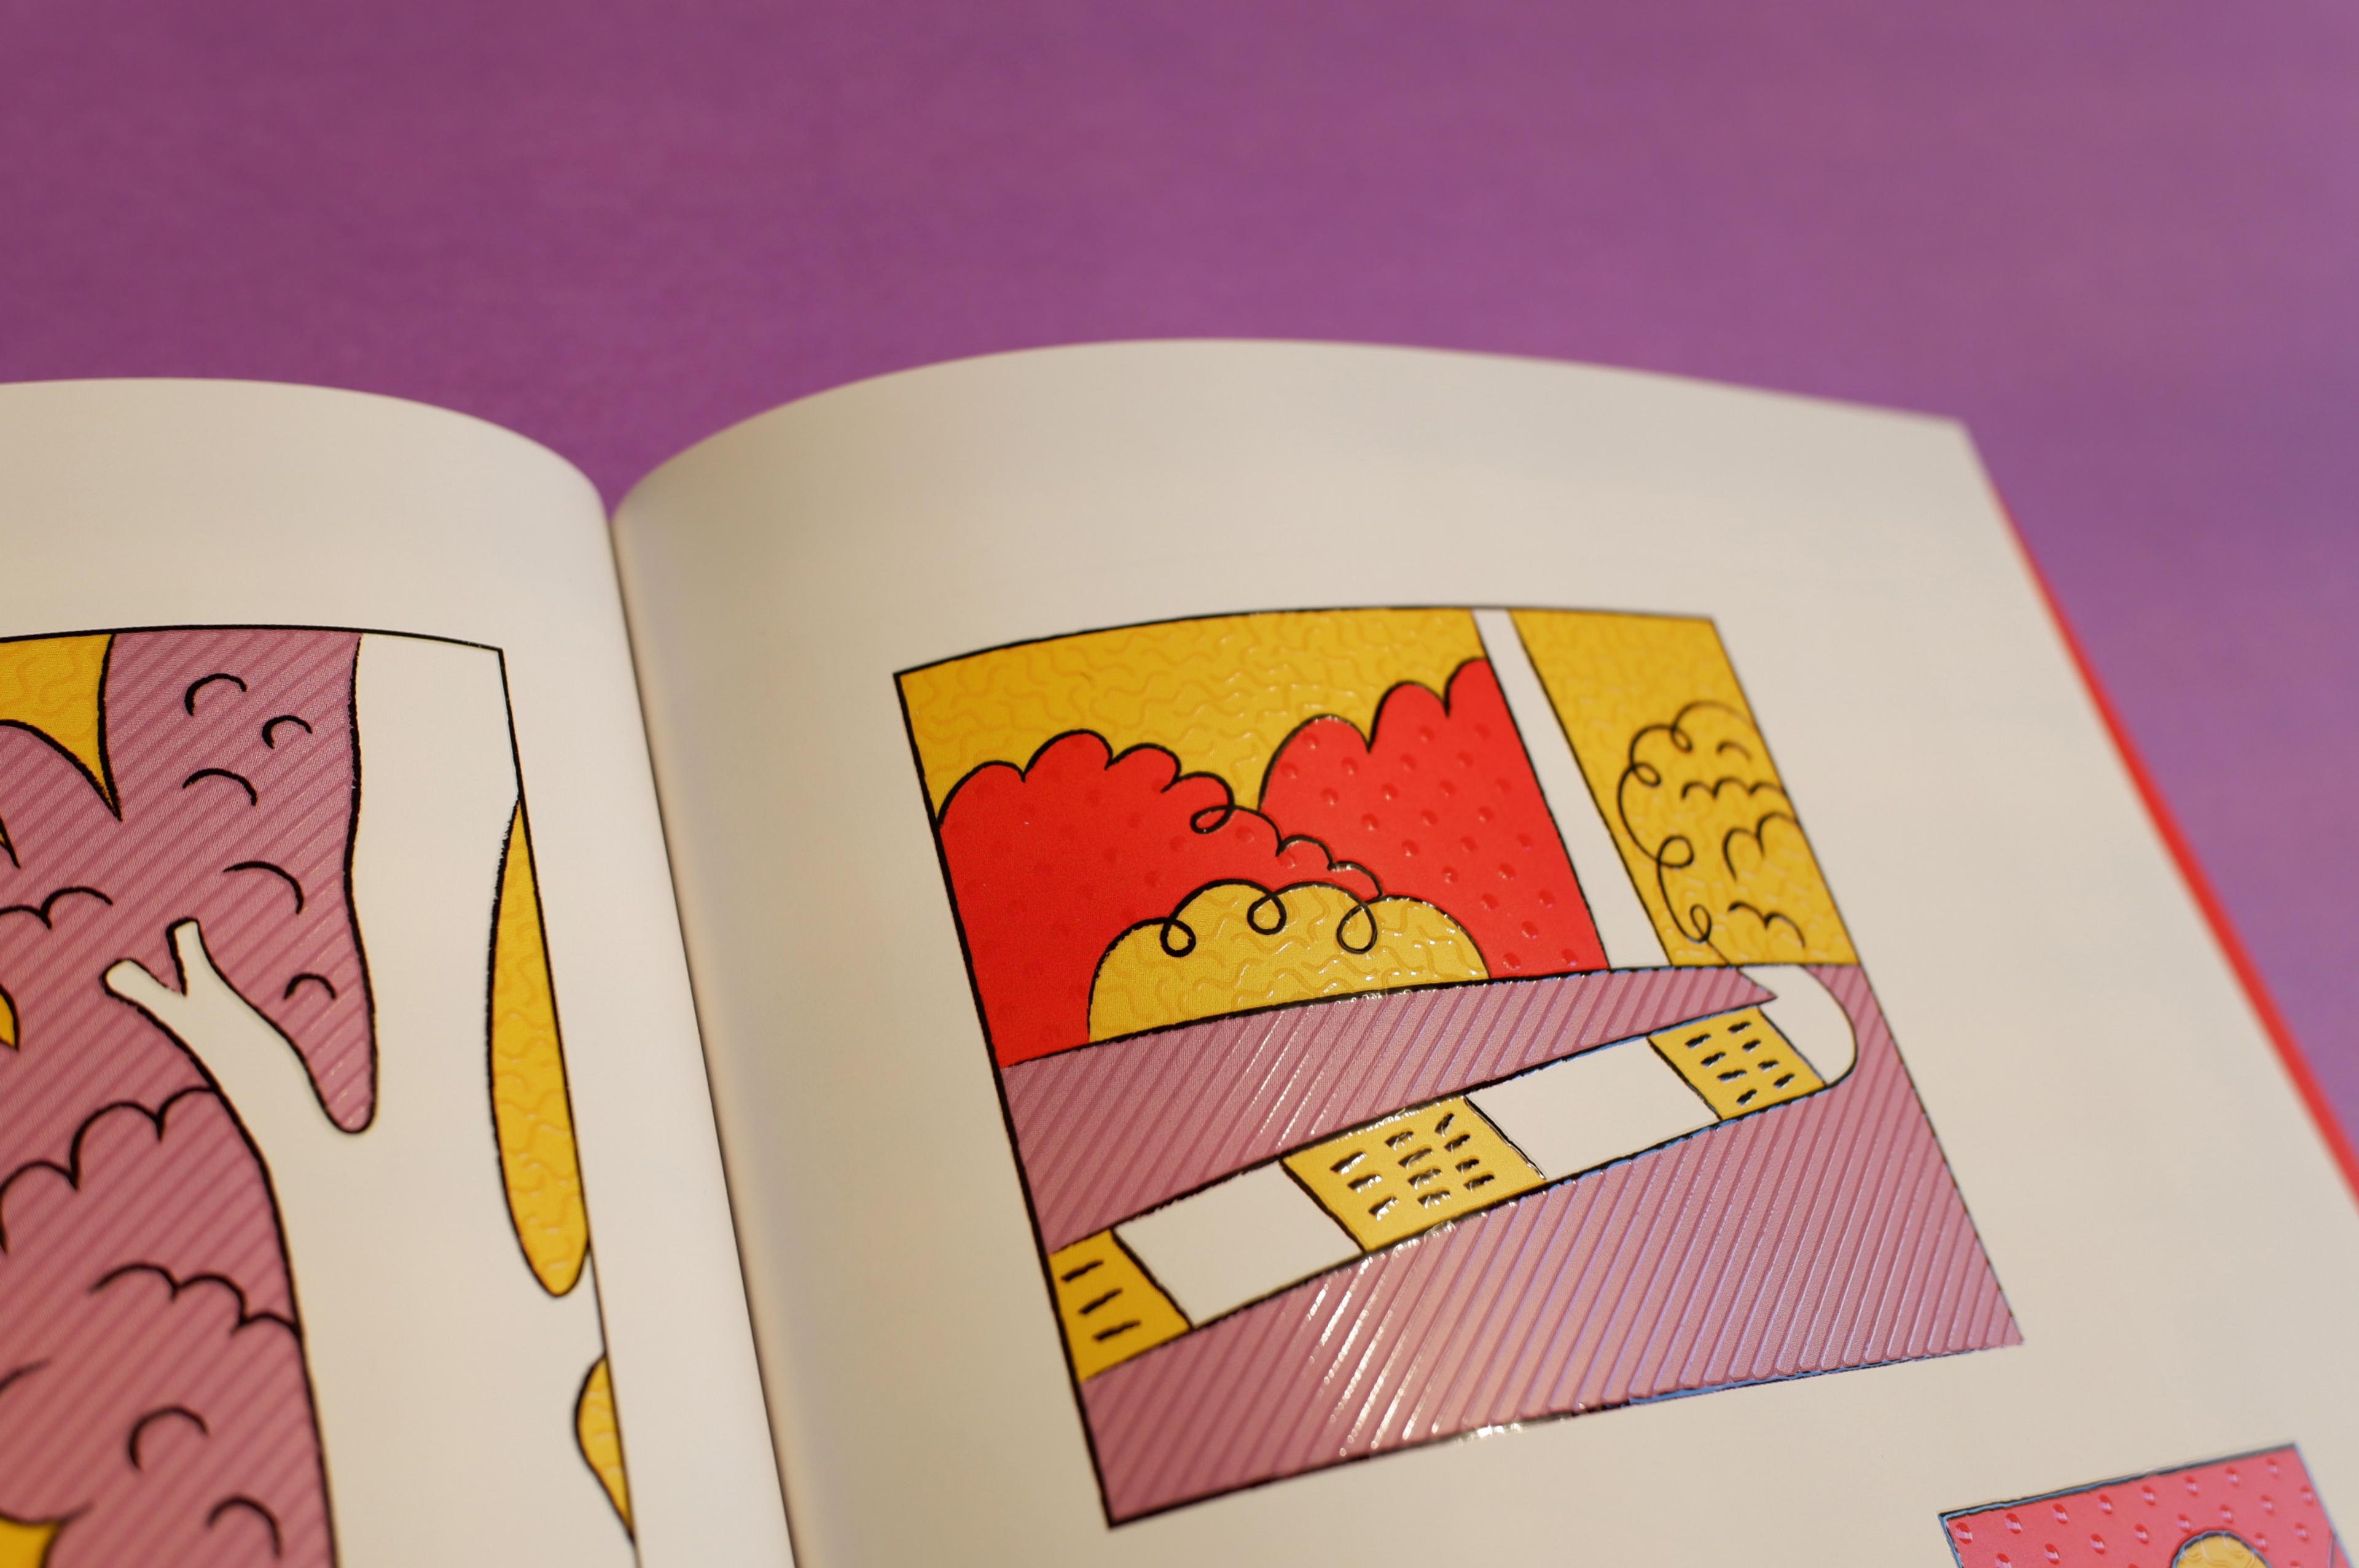 The top part of the page of an open book, with colourful illustrations. On top of the illustrations are a translucent texture that you can see the light bouncing off of.